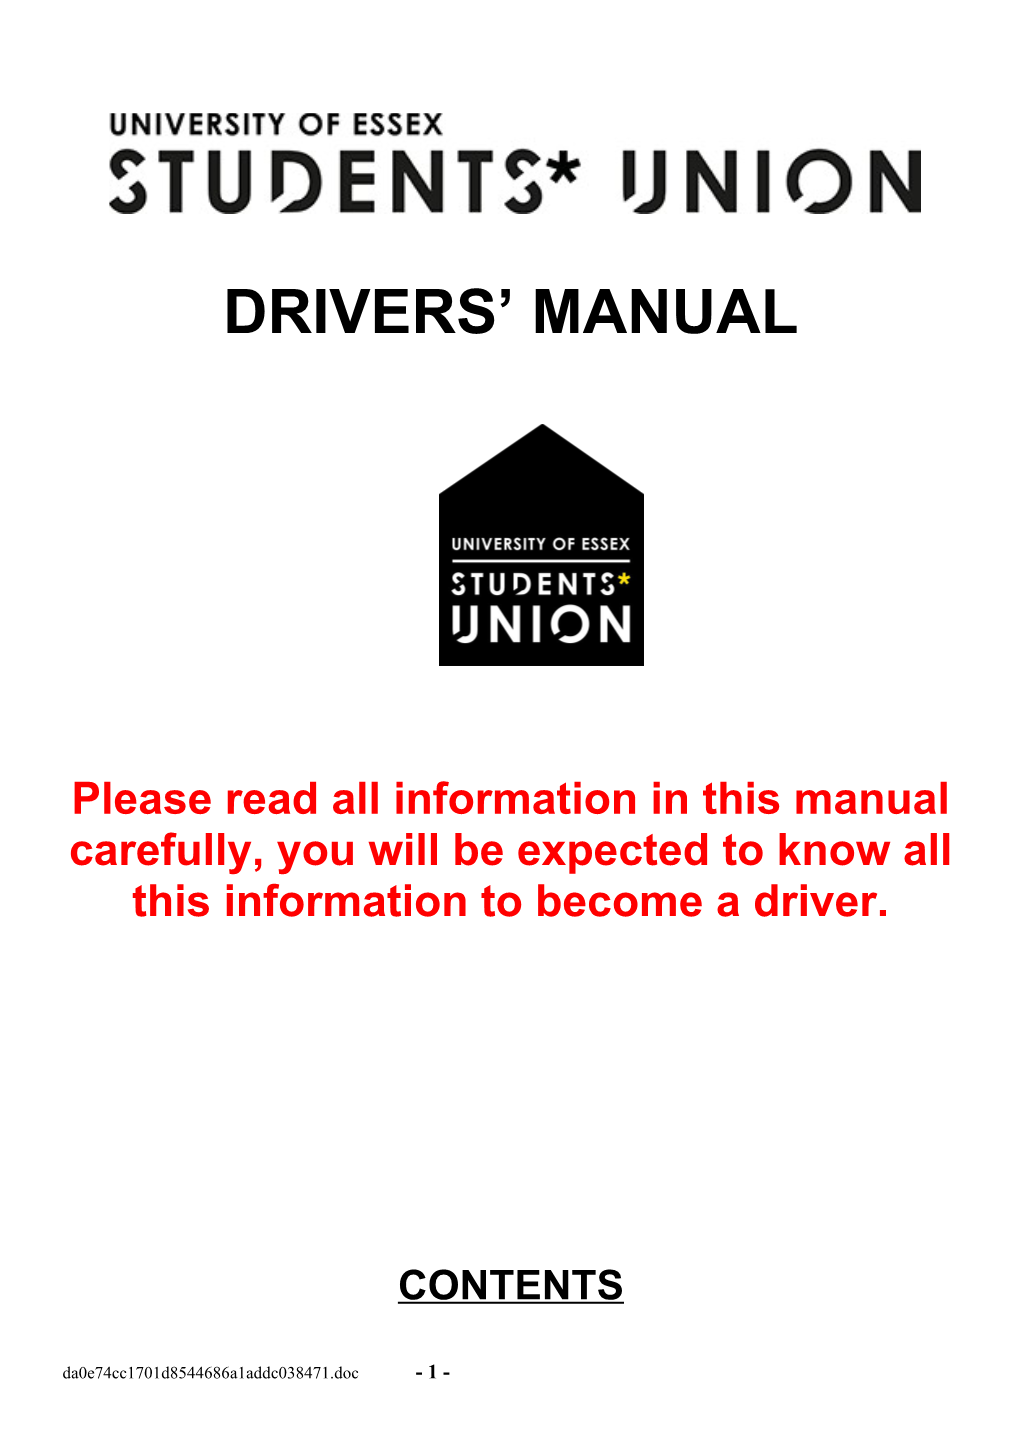 Please Read All Information in This Manual Carefully, You Will Be Expected to Know All